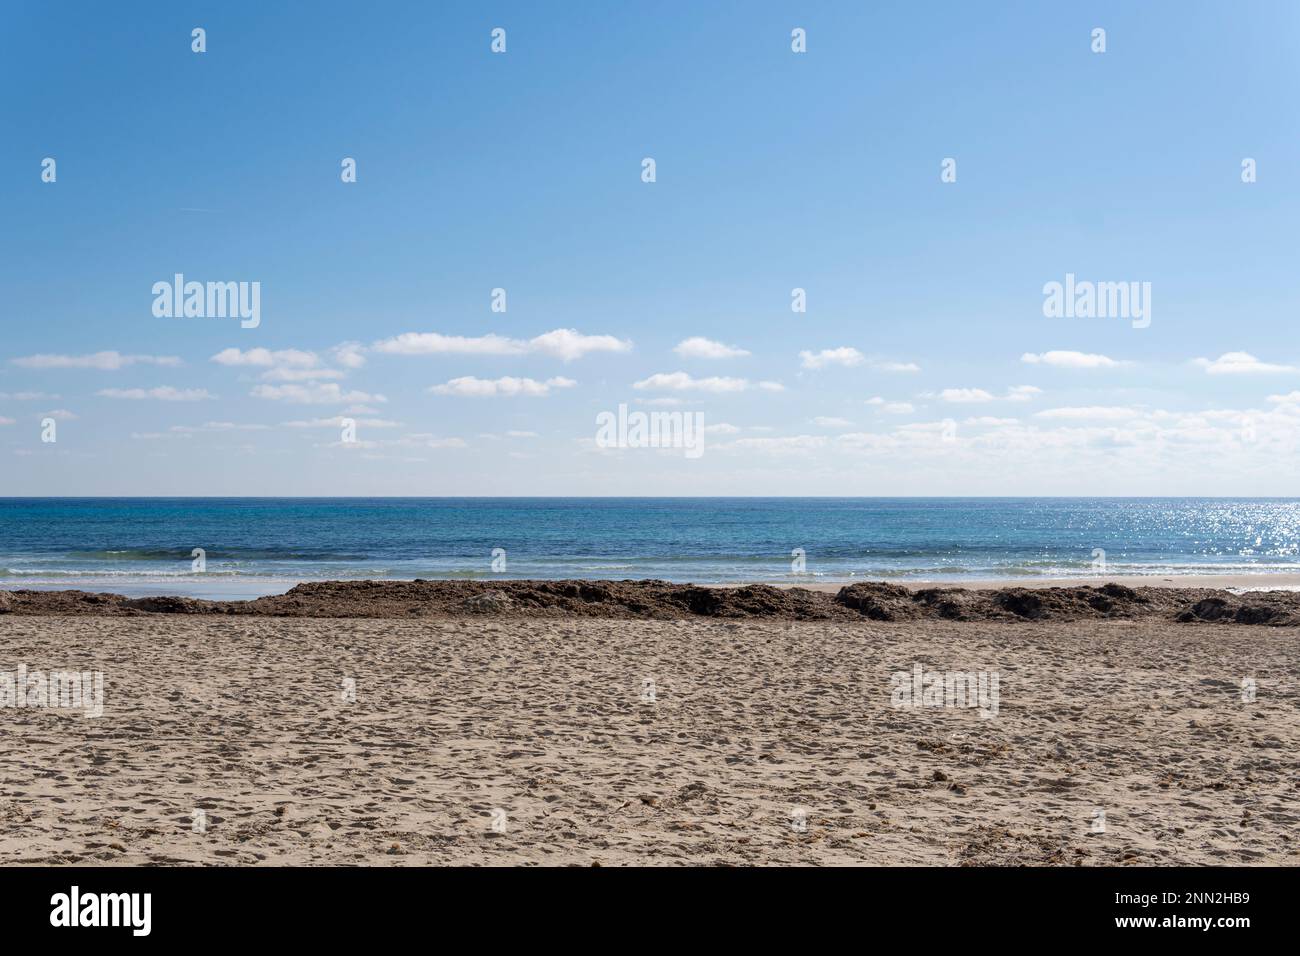 Beach of the Mallorcan tourist resort of Sa Coma at sunrise, without people. Spain Stock Photo